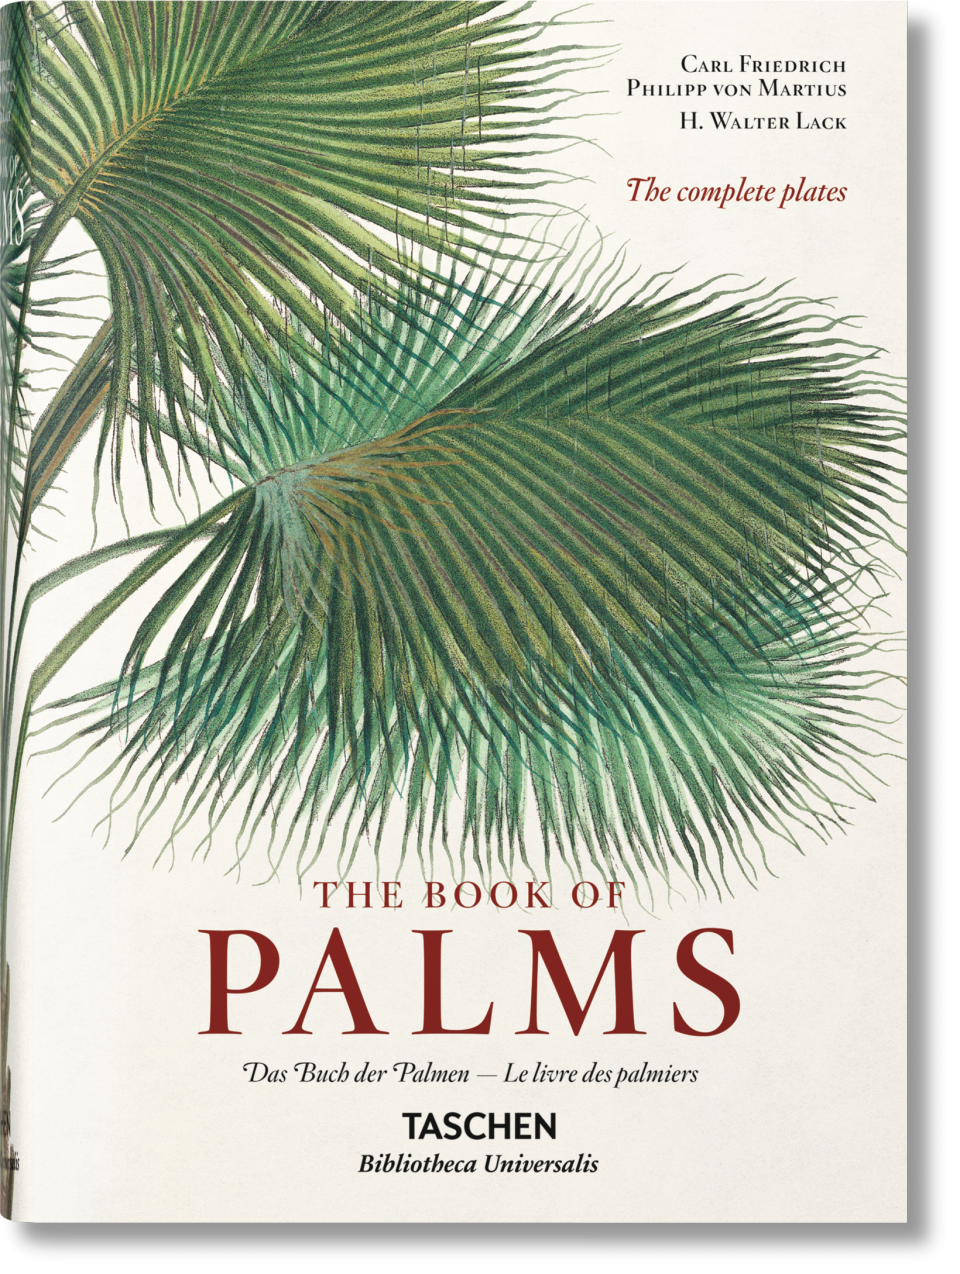 MARTIUS THE BOOK OF PALMS